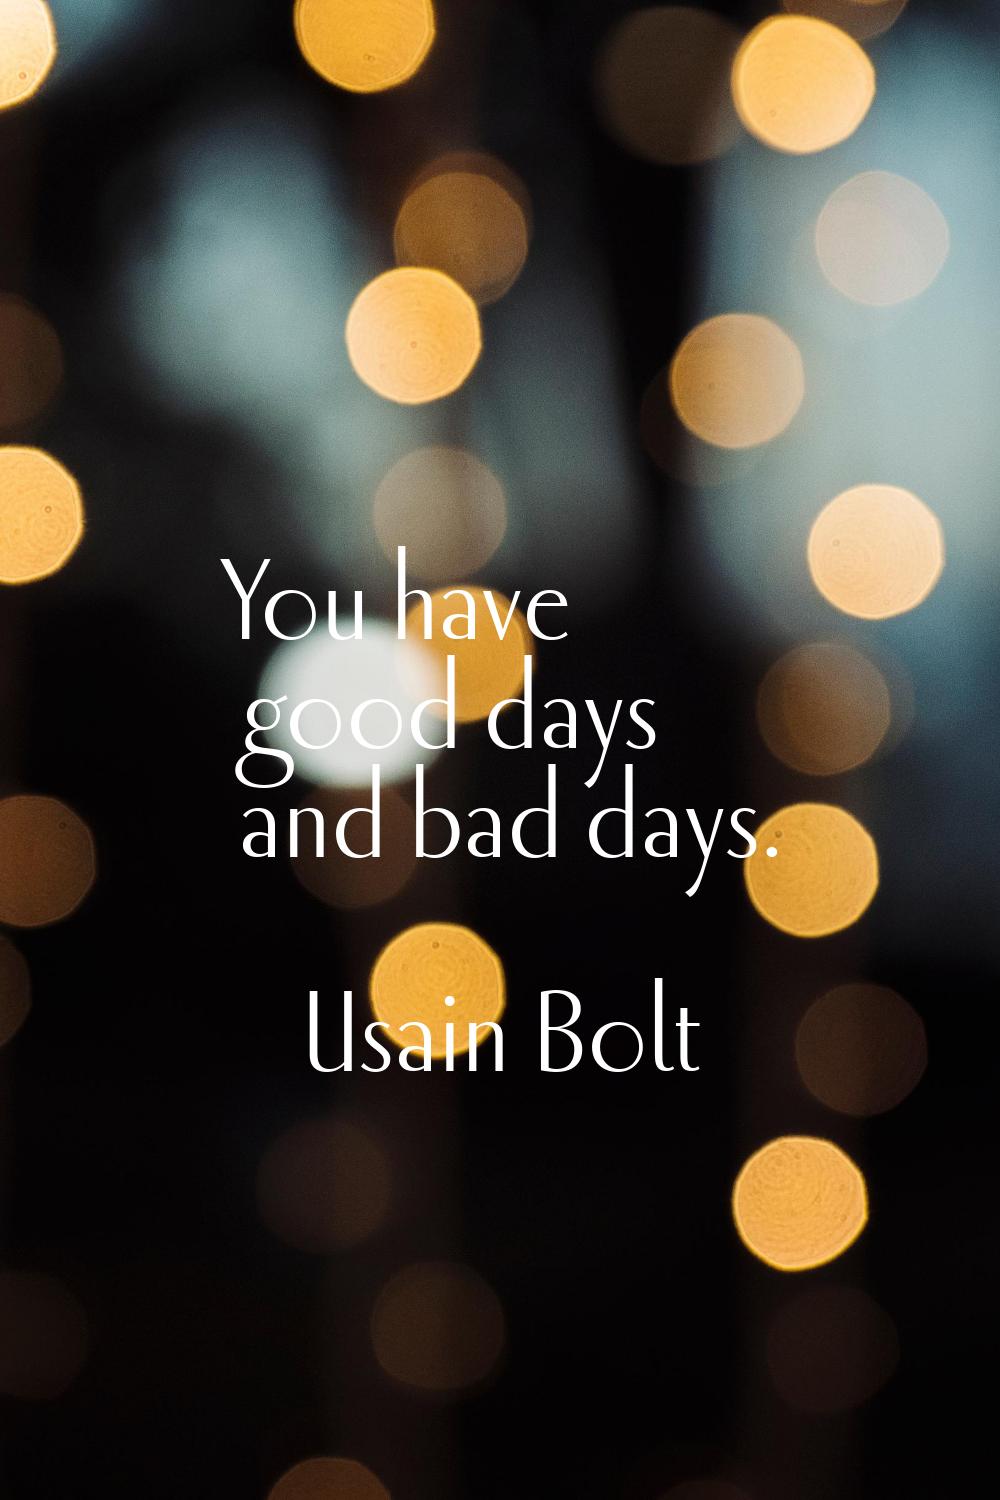 You have good days and bad days.